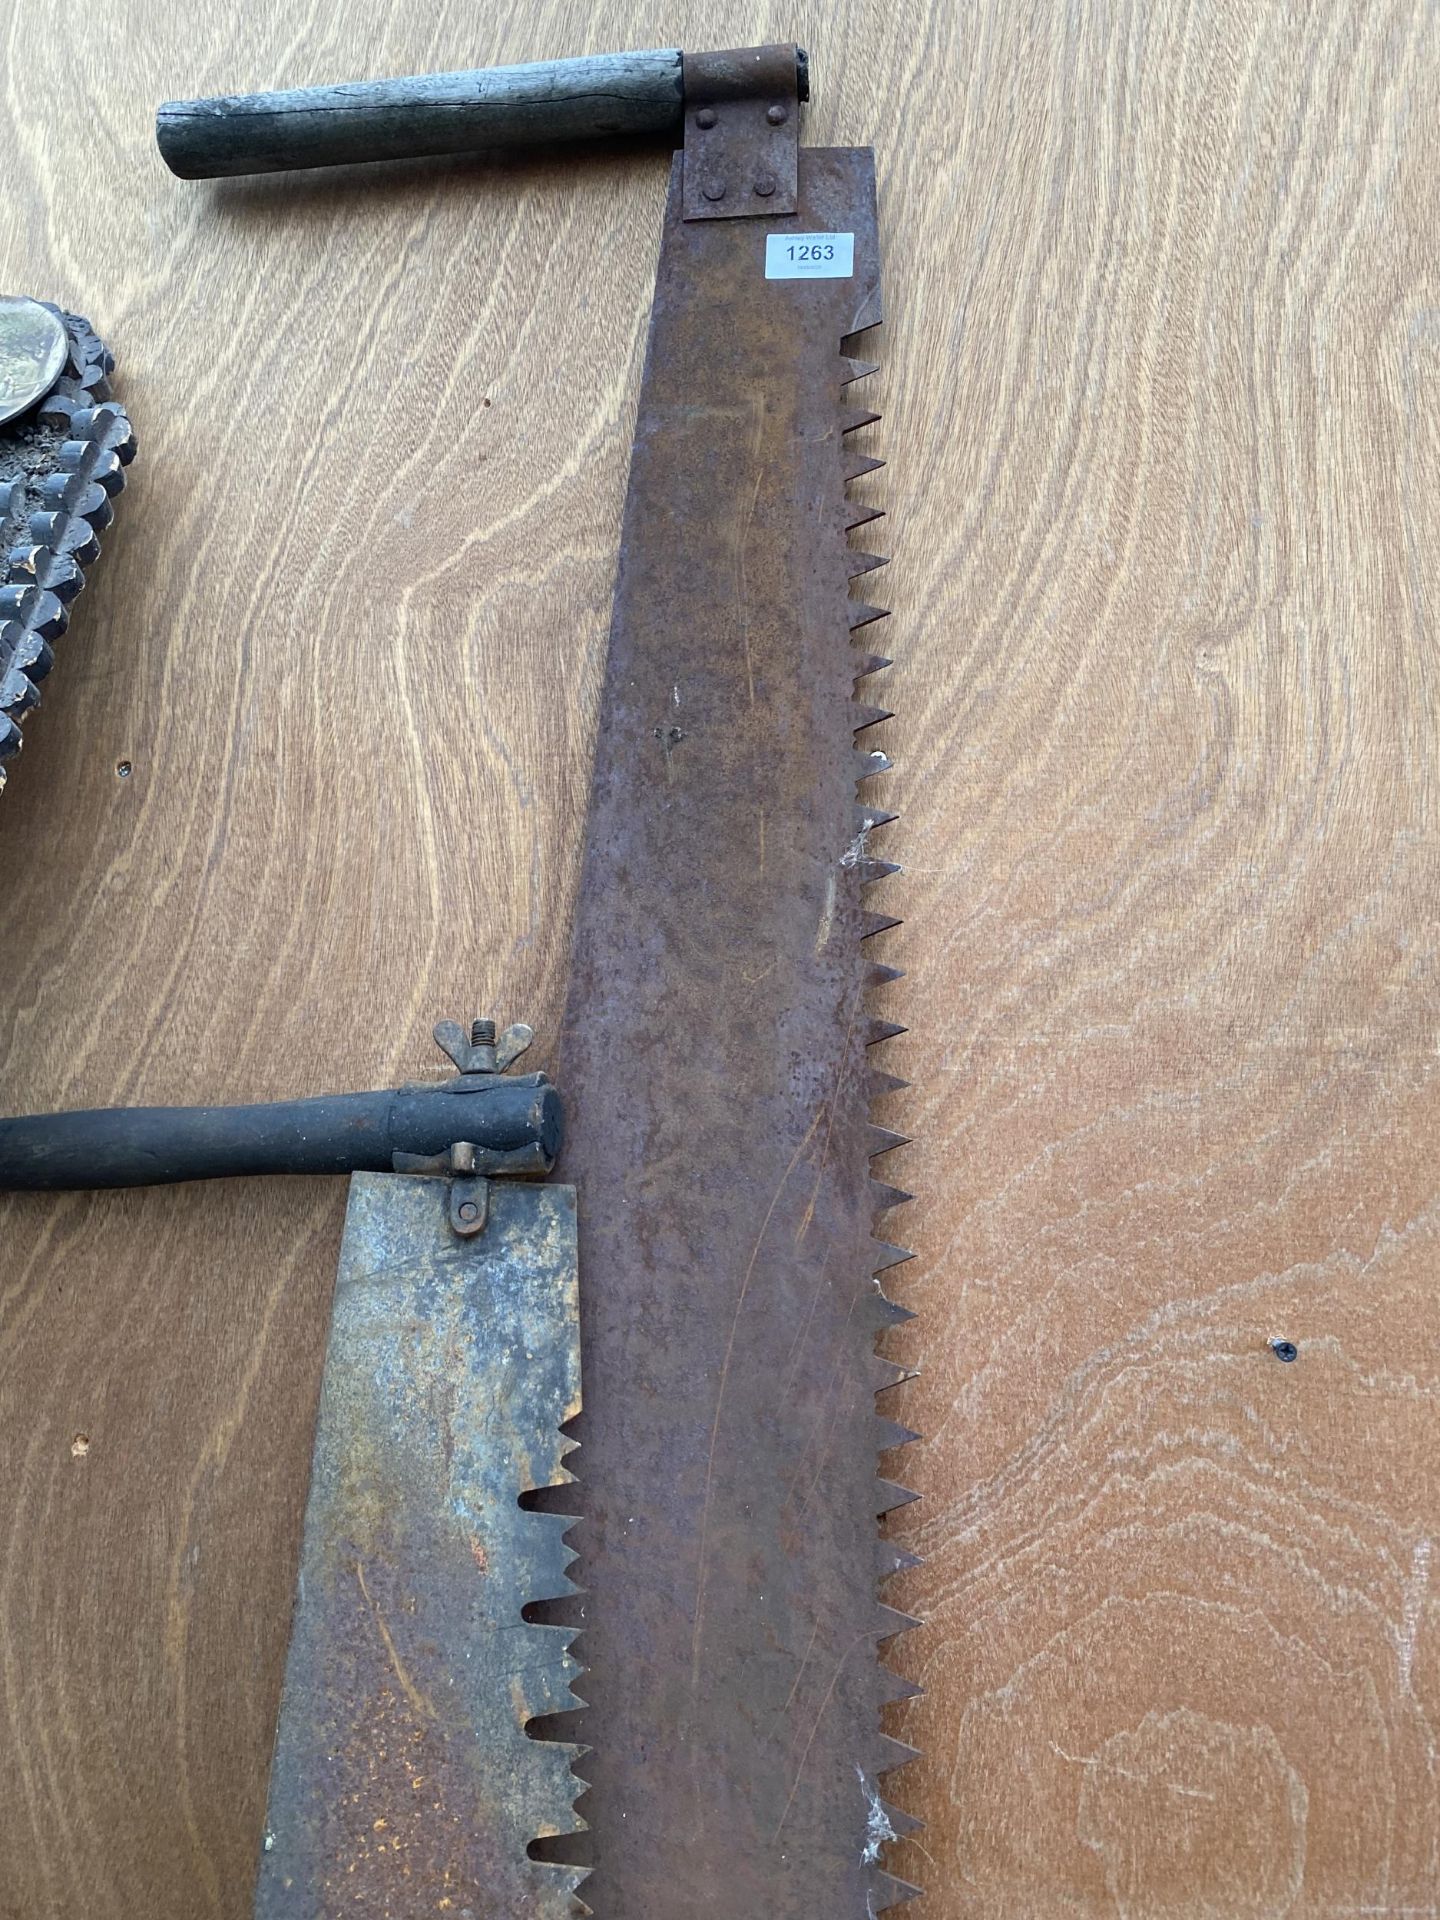 TWO VINTAGE WOODEN HANDLED CROSS CUT SAWS - Image 3 of 4